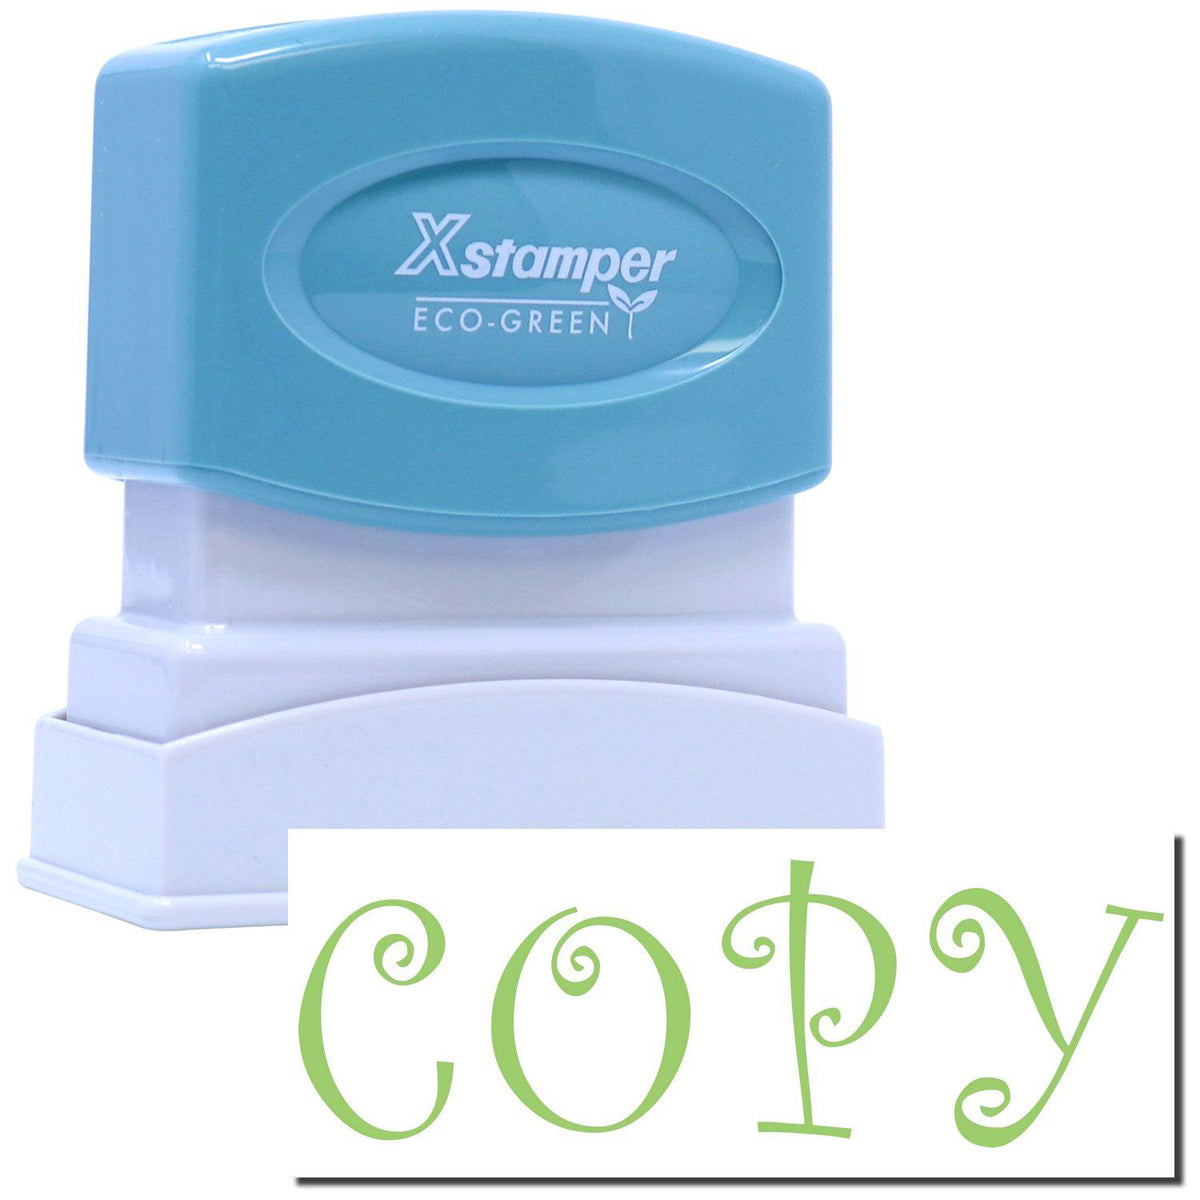 An xstamper stamp with a stamped image showing how the text &quot;COPY&quot; in a green color is displayed after stamping.